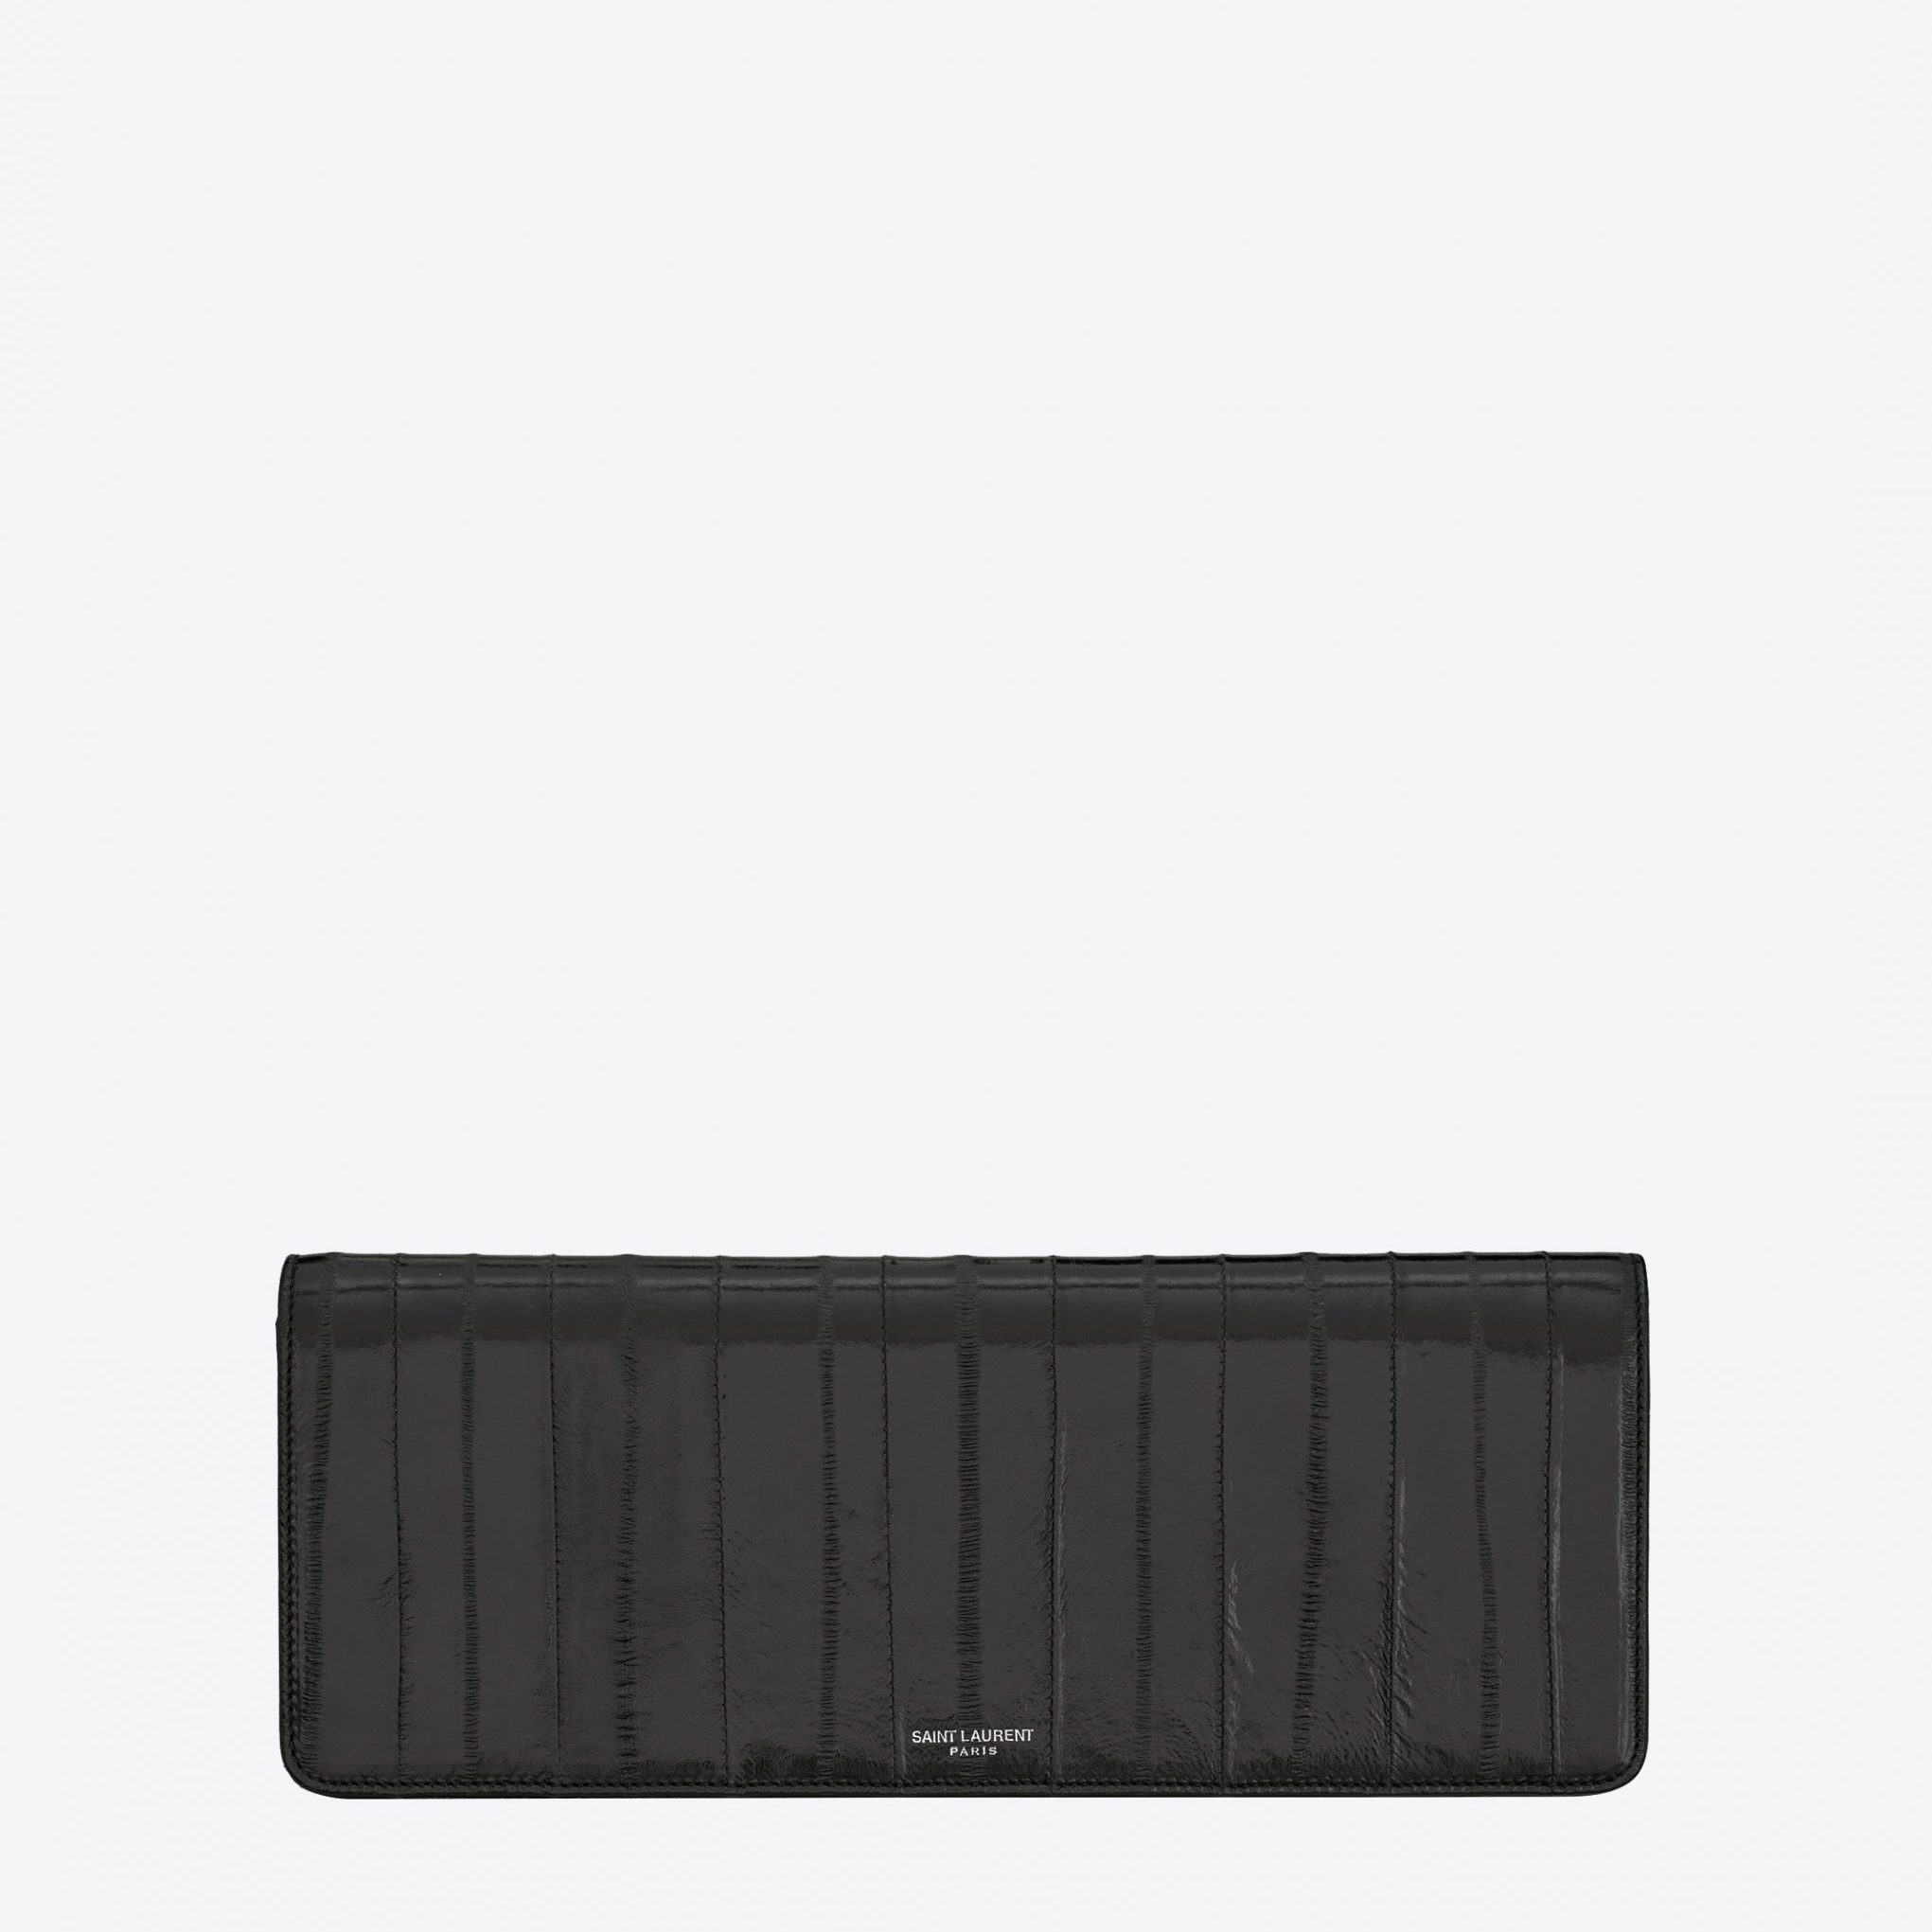 Saint Laurent’s Evening Clutch Is The Antidote To All The Crazy Bags Out There